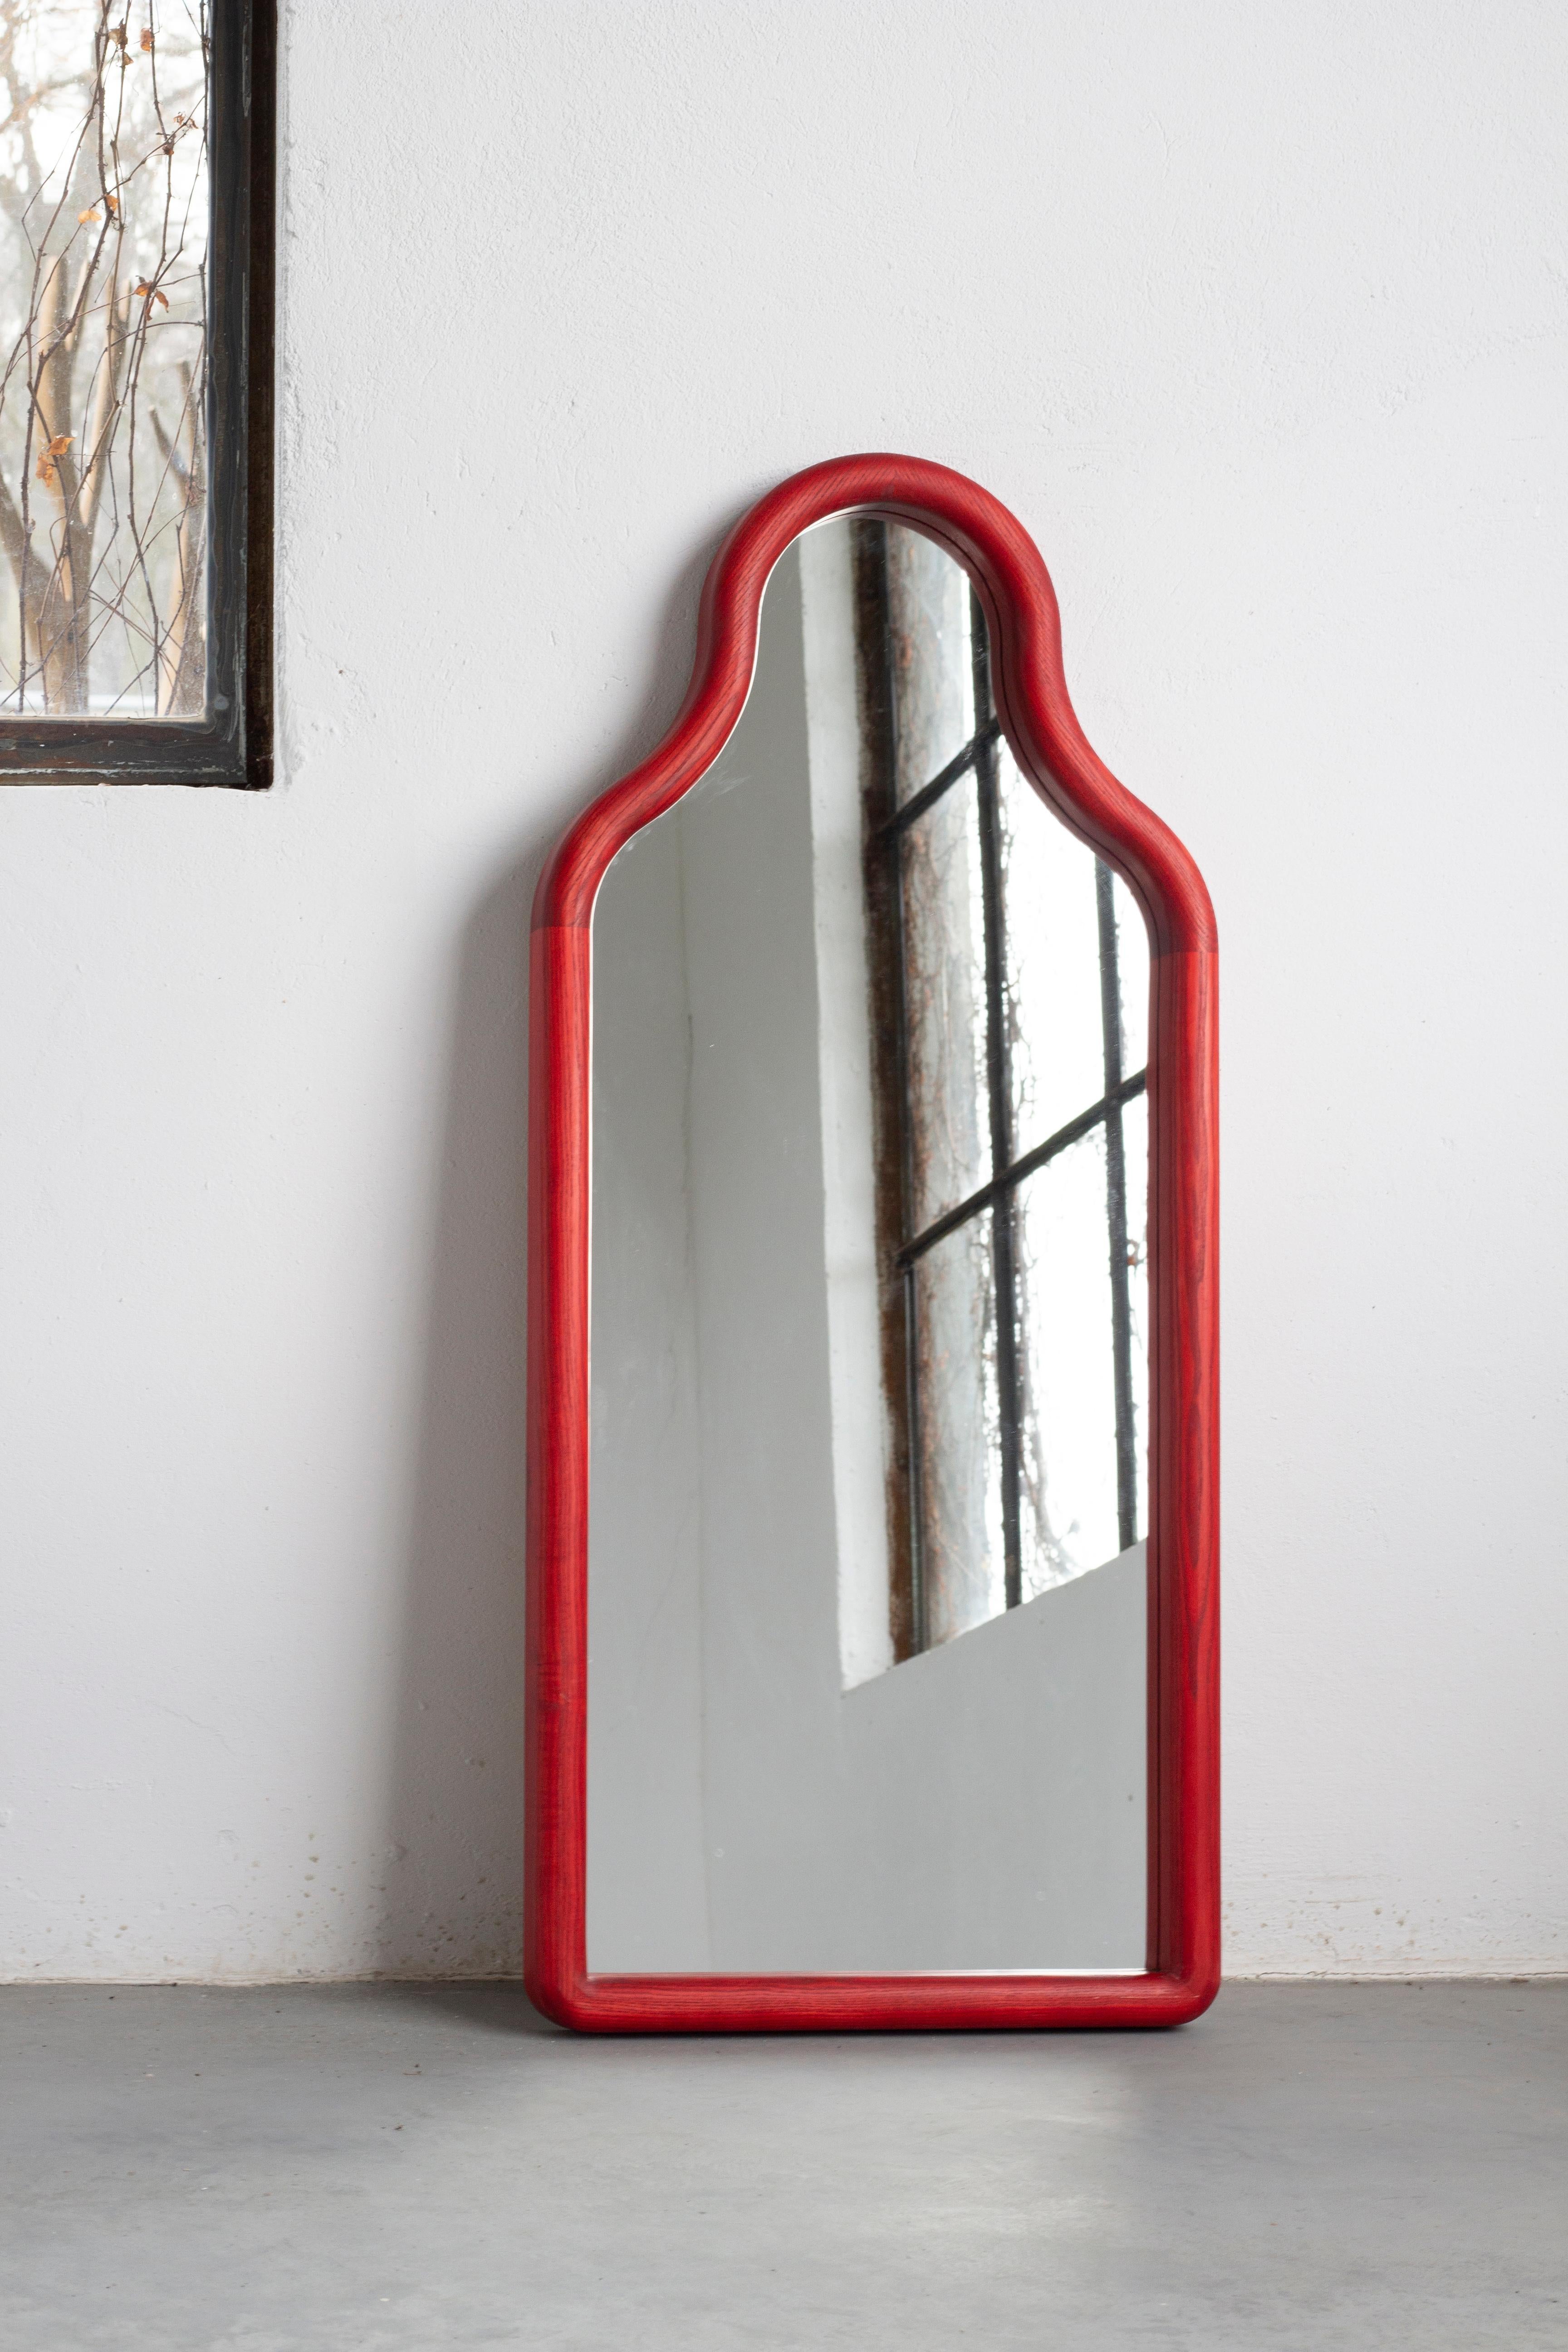 TRN M Floor mirror
Signed by Pani Jurek

Dimensions: H110 x 51.5 x 5
Materials: Solid ashwood, hand stained
Colors: red, blue, green, natural
_________________________________

Pani Jurek is a Polish design studio founded by artist and designer